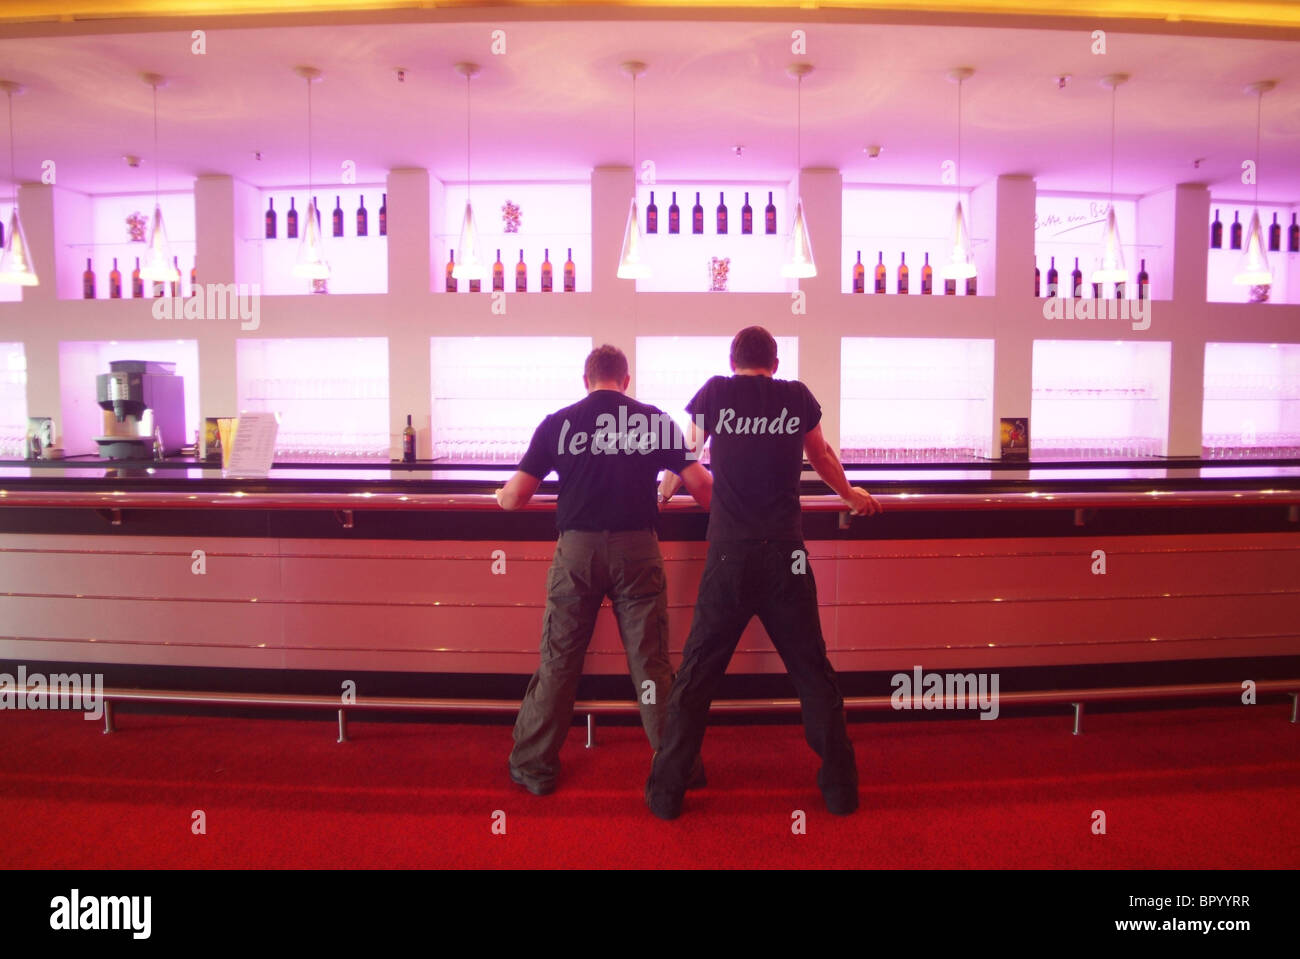 Two men with the words 'last round' written on their t-shirts, Germany Stock Photo